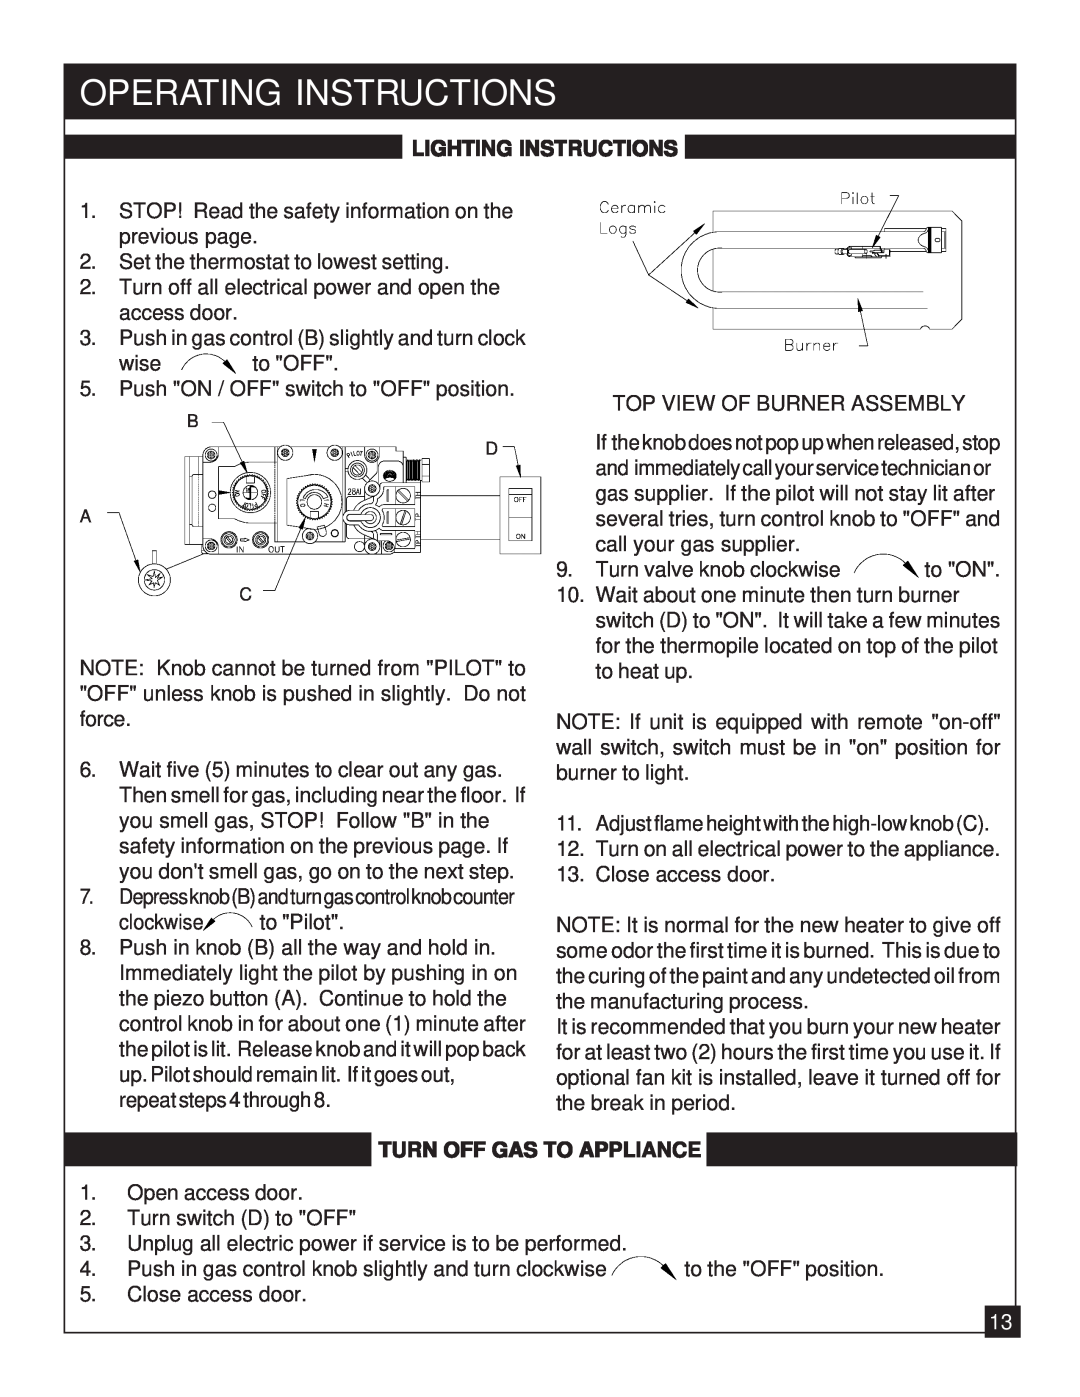 United States Stove 9947 installation manual Operating Instructions, Lighting Instructions, Turn Off Gas To Appliance 